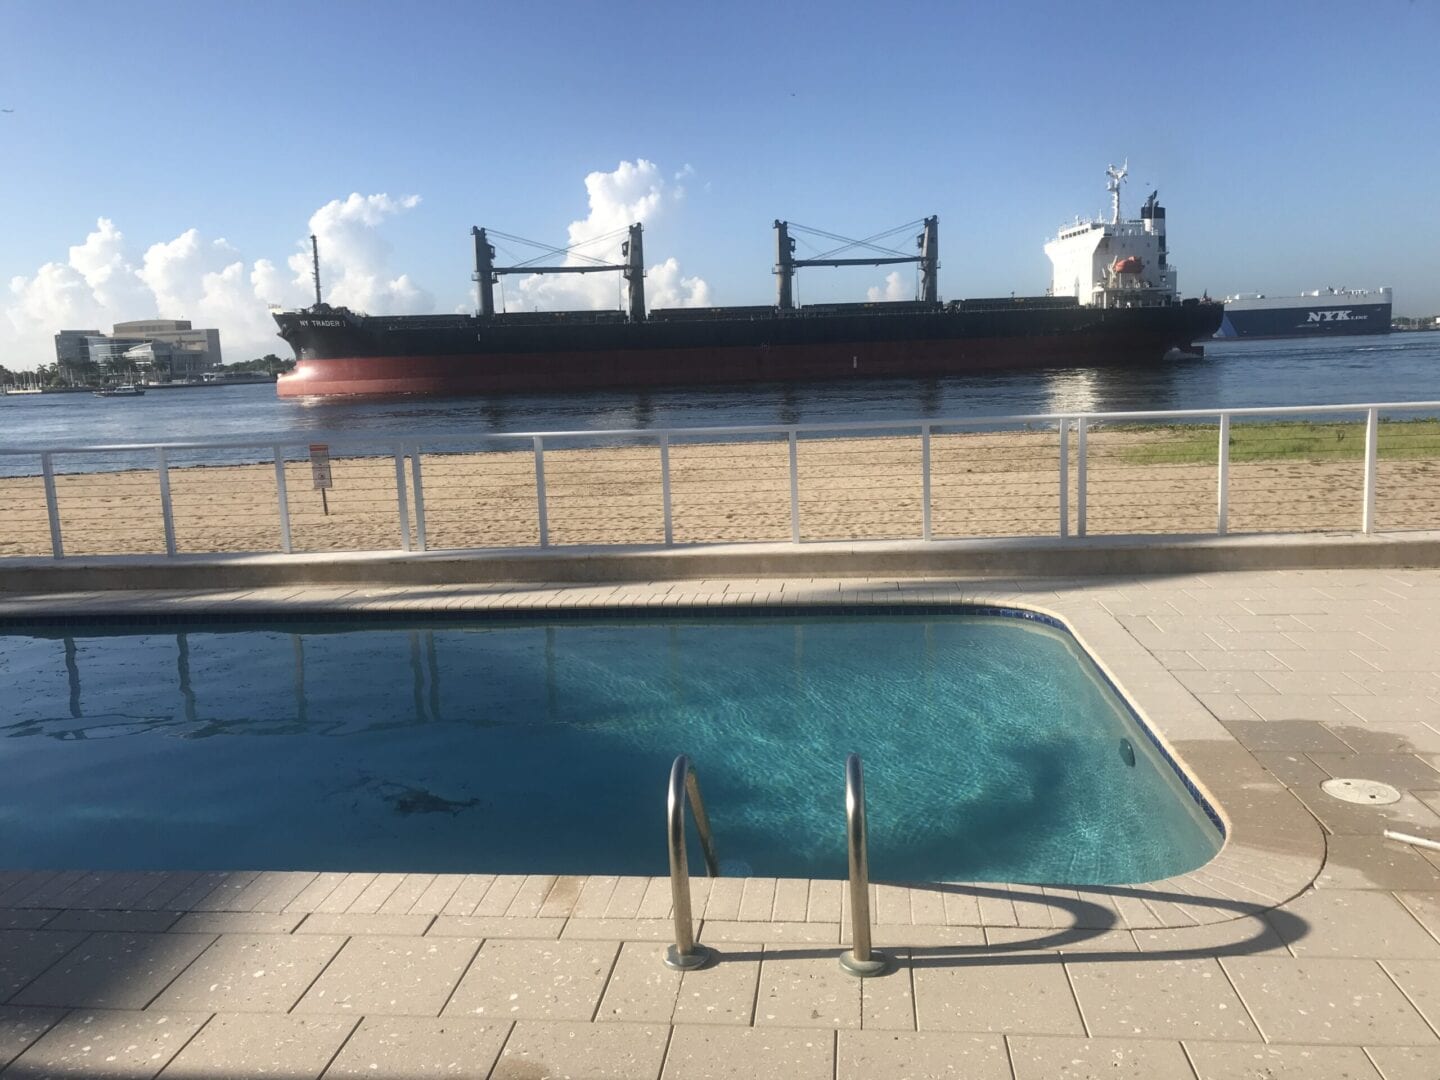 Rounded rectangle pool near the ocean and a big ship nearby (different angle)